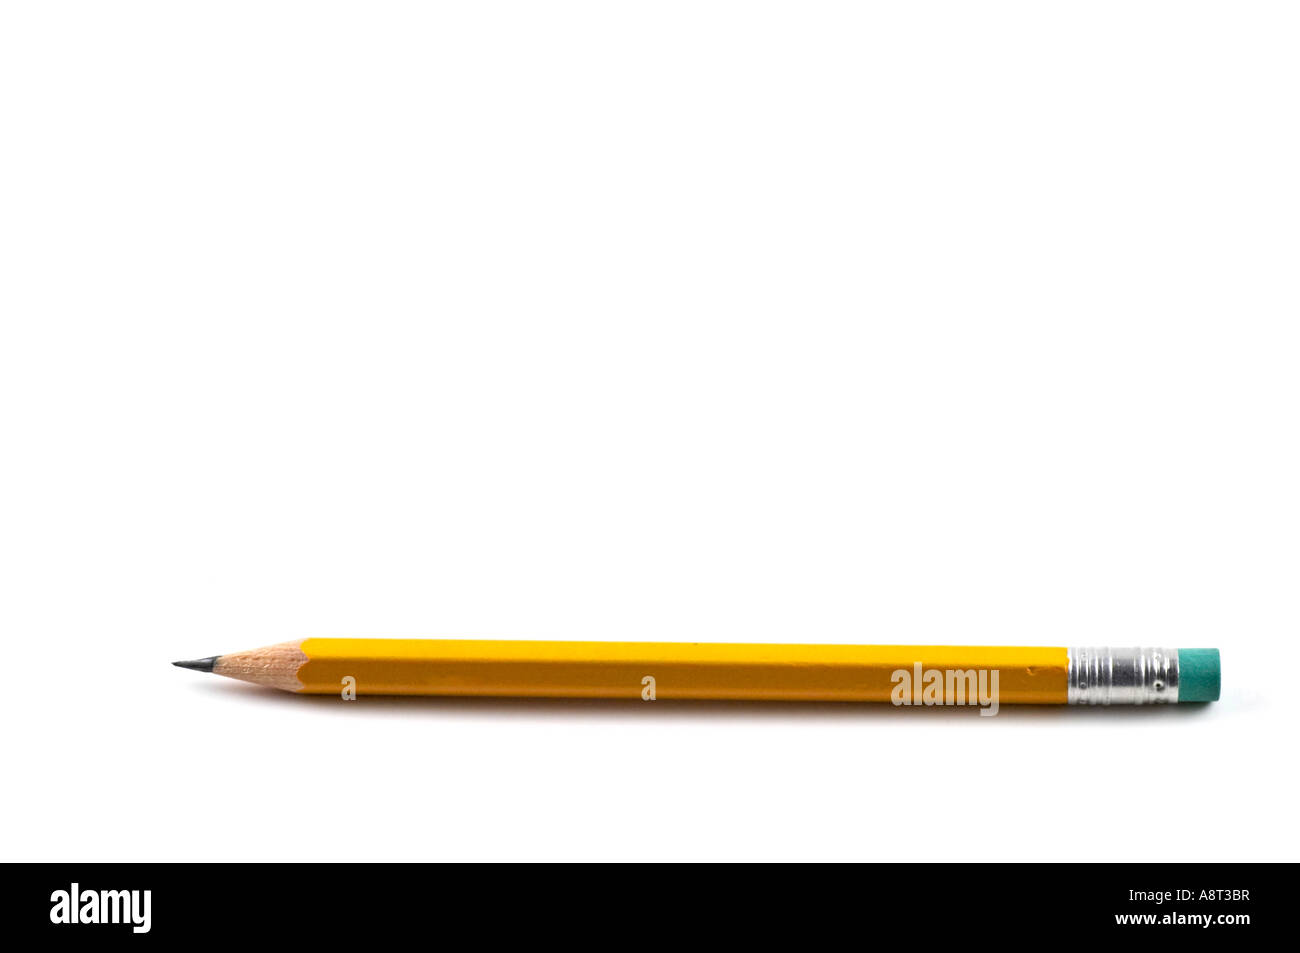 Pencil writing or drawing instrument Stock Photo